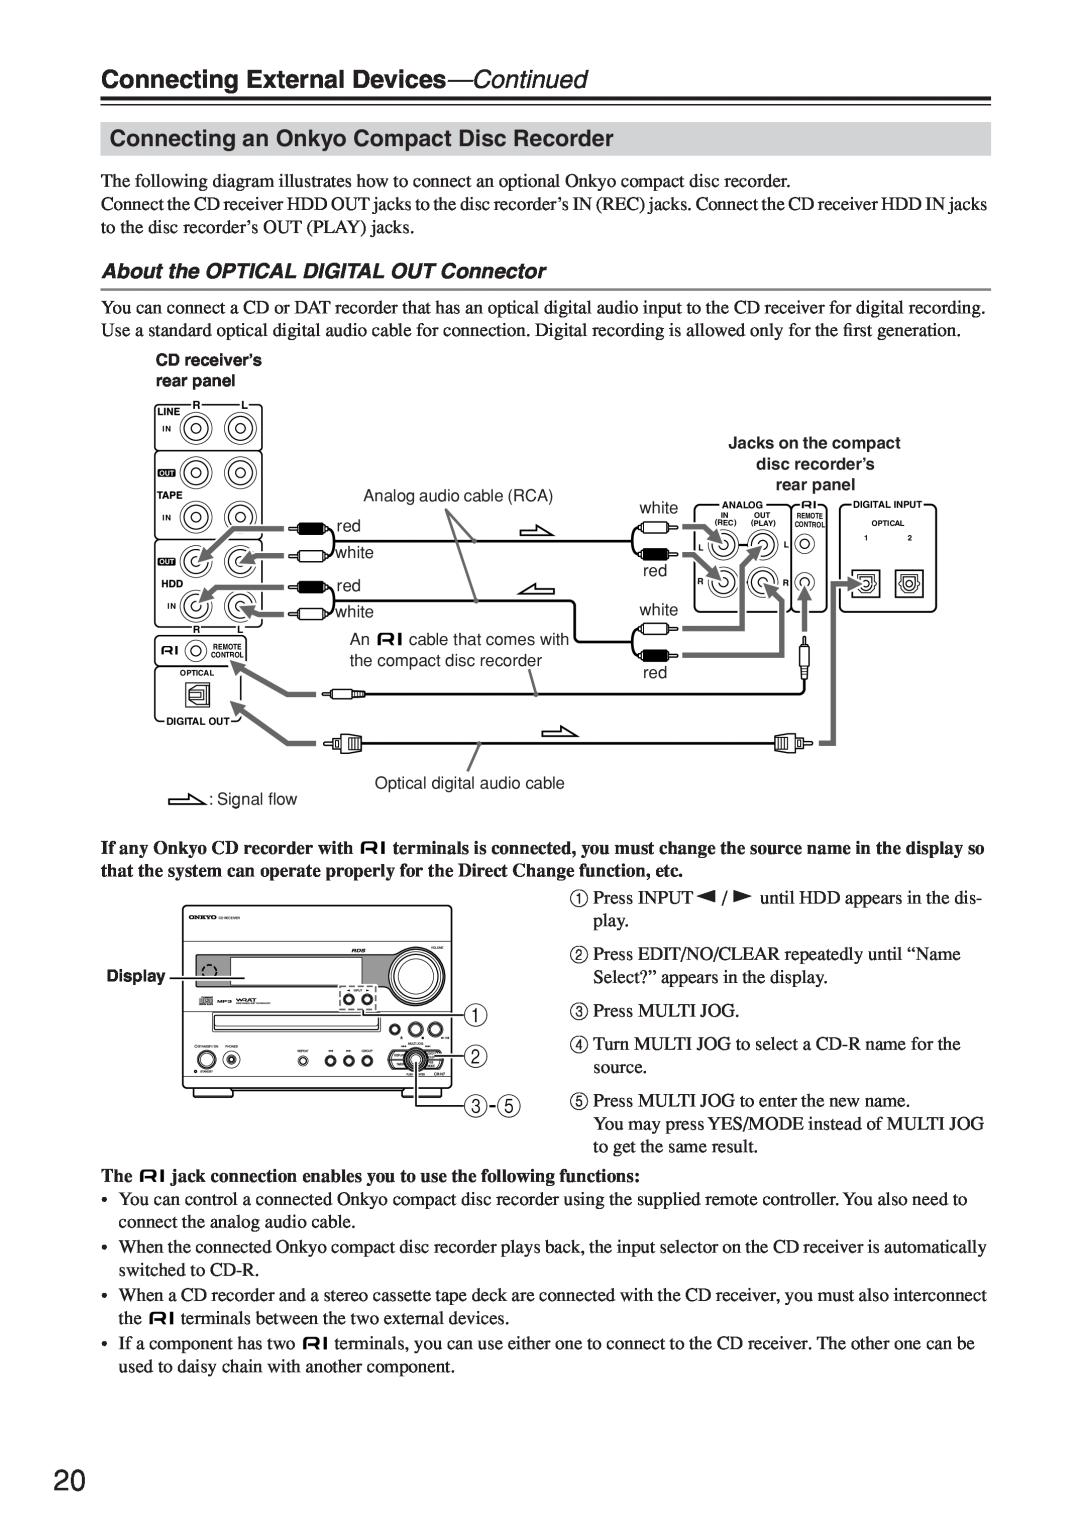 Onkyo CR-N7 instruction manual Connecting an Onkyo Compact Disc Recorder, About the OPTICAL DIGITAL OUT Connector 